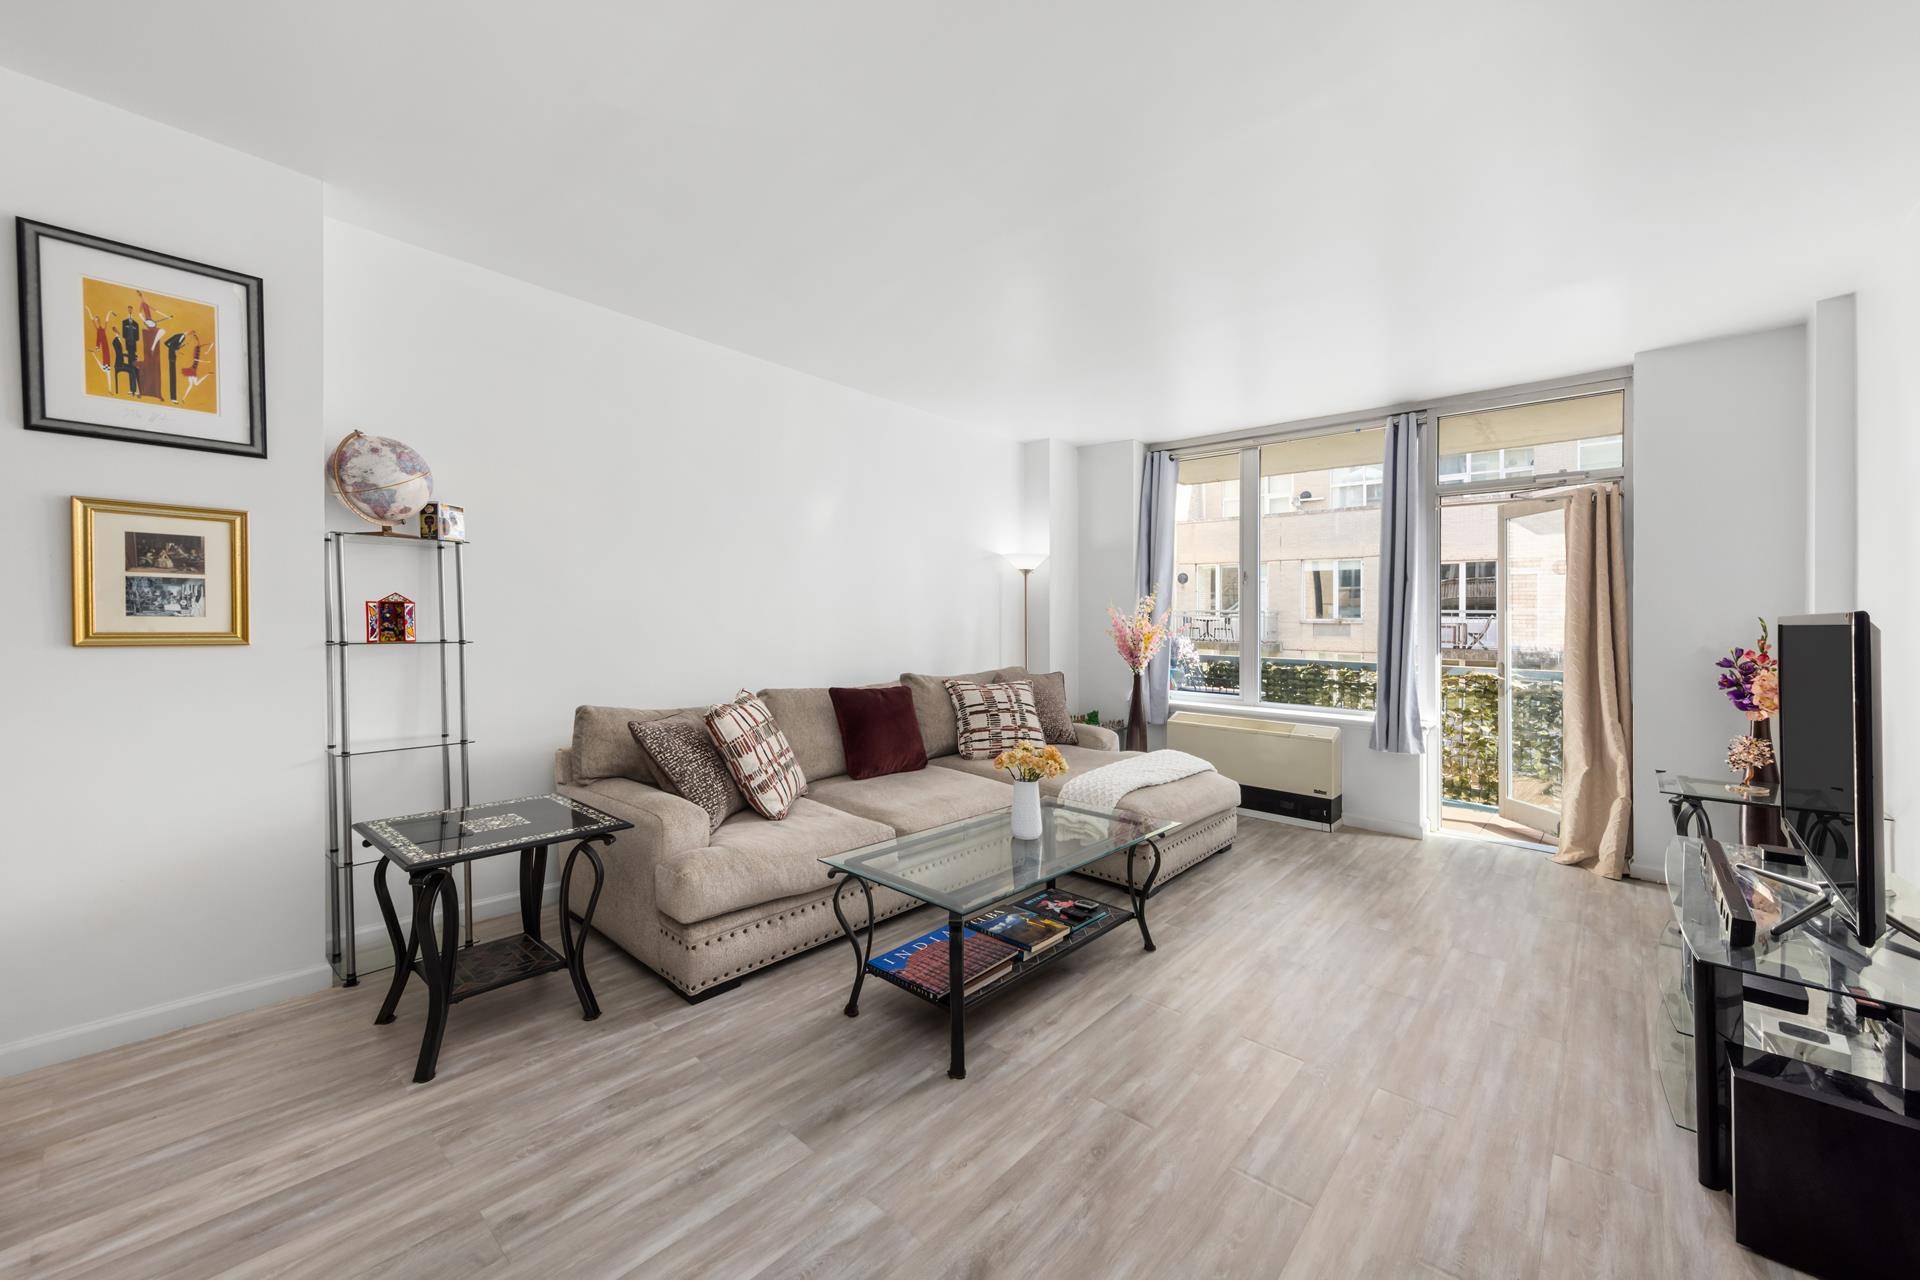 Residence 402 is an expansive two bedroom, two bathroom apartment located in one of the most desirable waterfront condominiums Williamsburg has to offer.